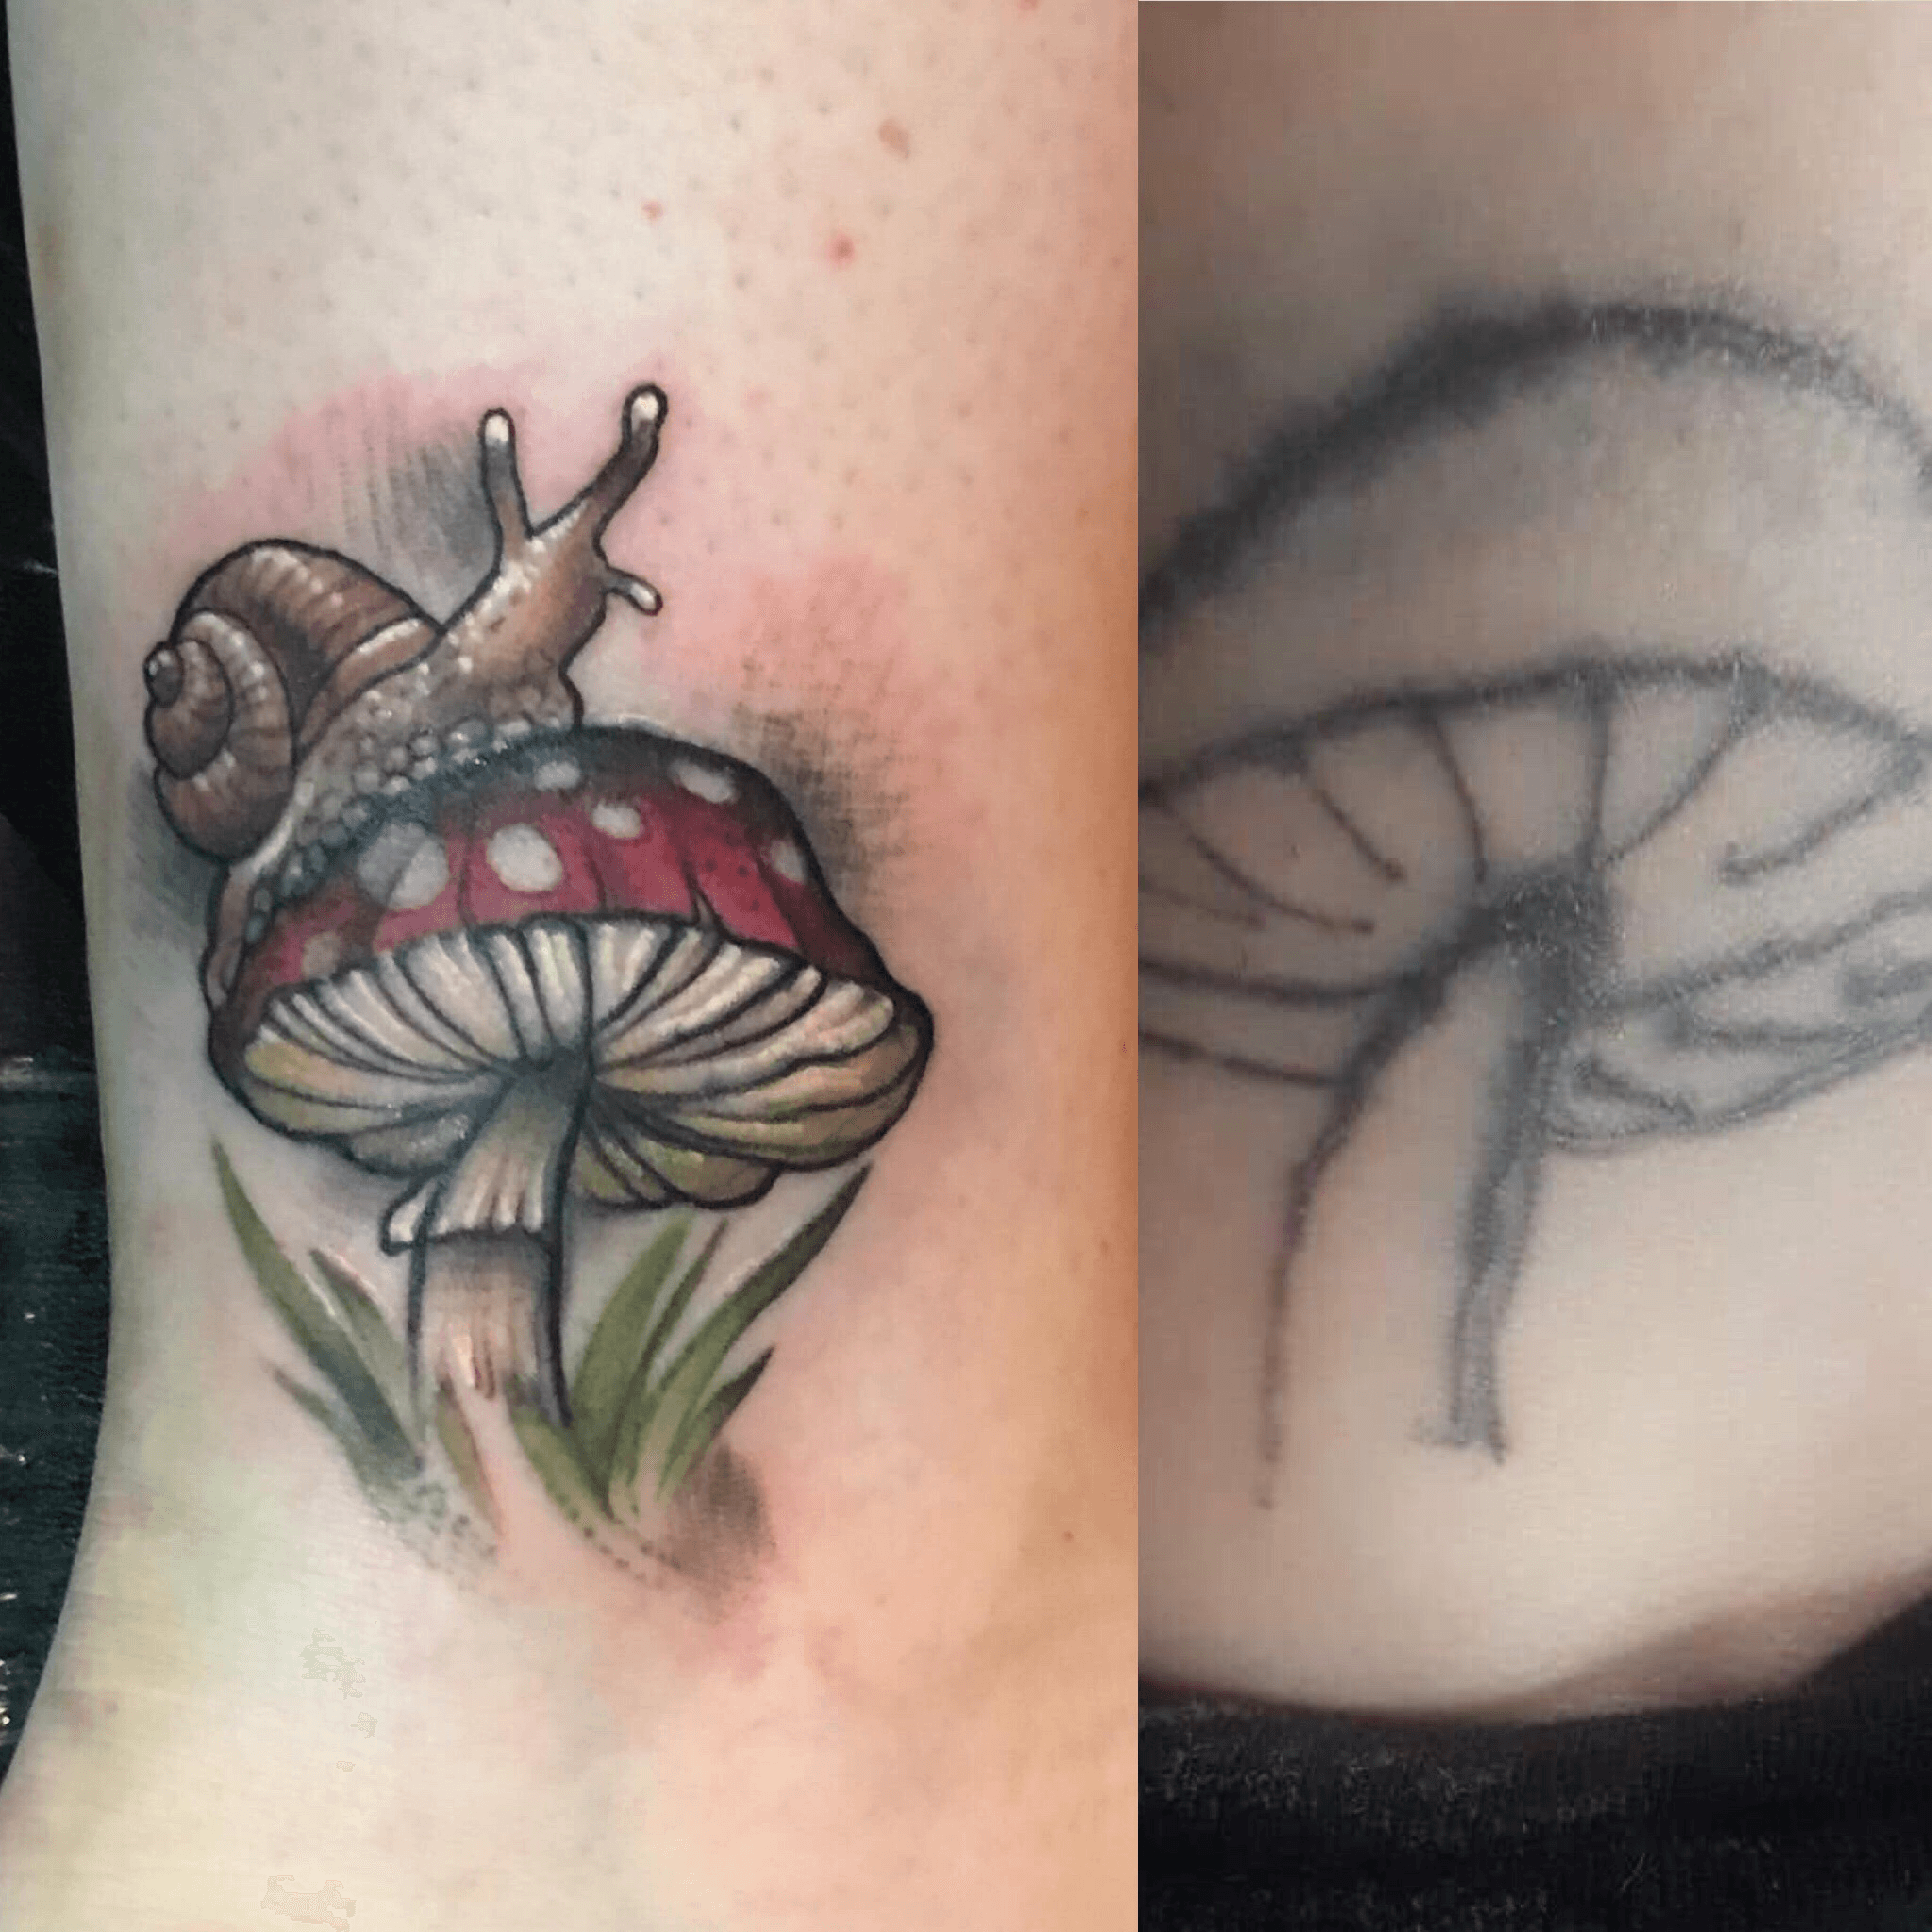 Tattoo uploaded by @mutated_sushi • Snail cover up. #snail #mushroom  #nature #color #neotraditional #illustrative #fixup #coverup #milwaukee  #chicago #Wisconsin #plant #tattooartist #tattooart #tattoo • Tattoodo